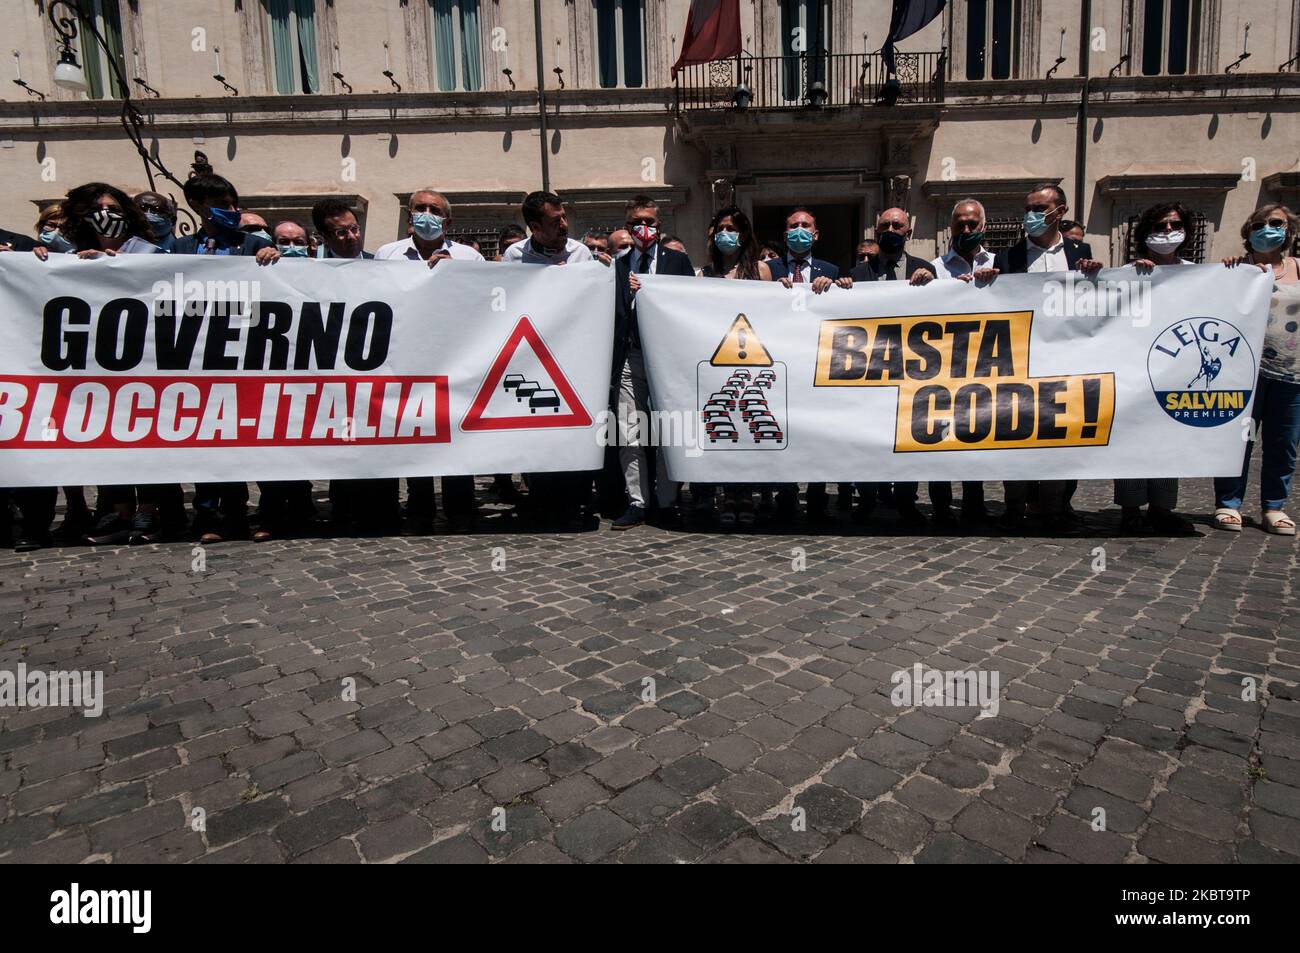 Lega Political party leader Matteo Salvini protest during a demonstration called 'Blocca Italia' (Block Italy) on July 9, 2020 in Rome, Italy. The leader of the Lega is protesting against the Italian government who he thinks is blocking the Italian economy and to request the release of the situation of Autostrade S.p.A. (Photo by Andrea Ronchini/NurPhoto) Stock Photo